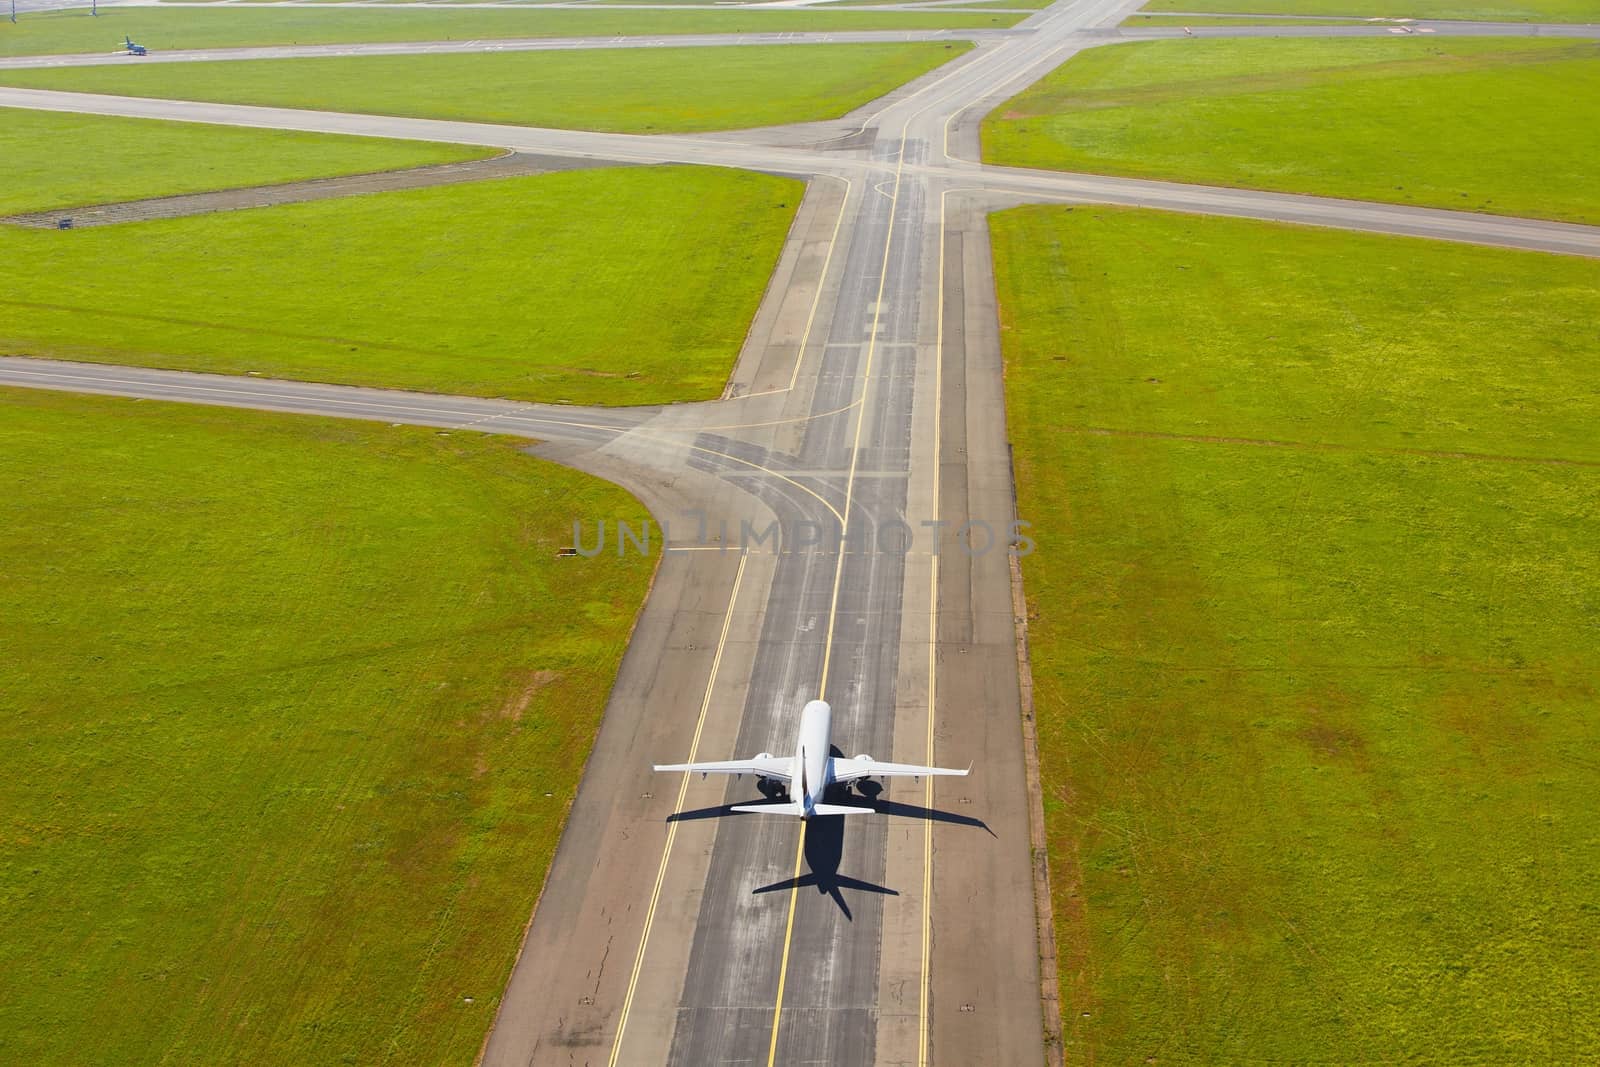 Aerial view of airport - airplane is taxiing to take off